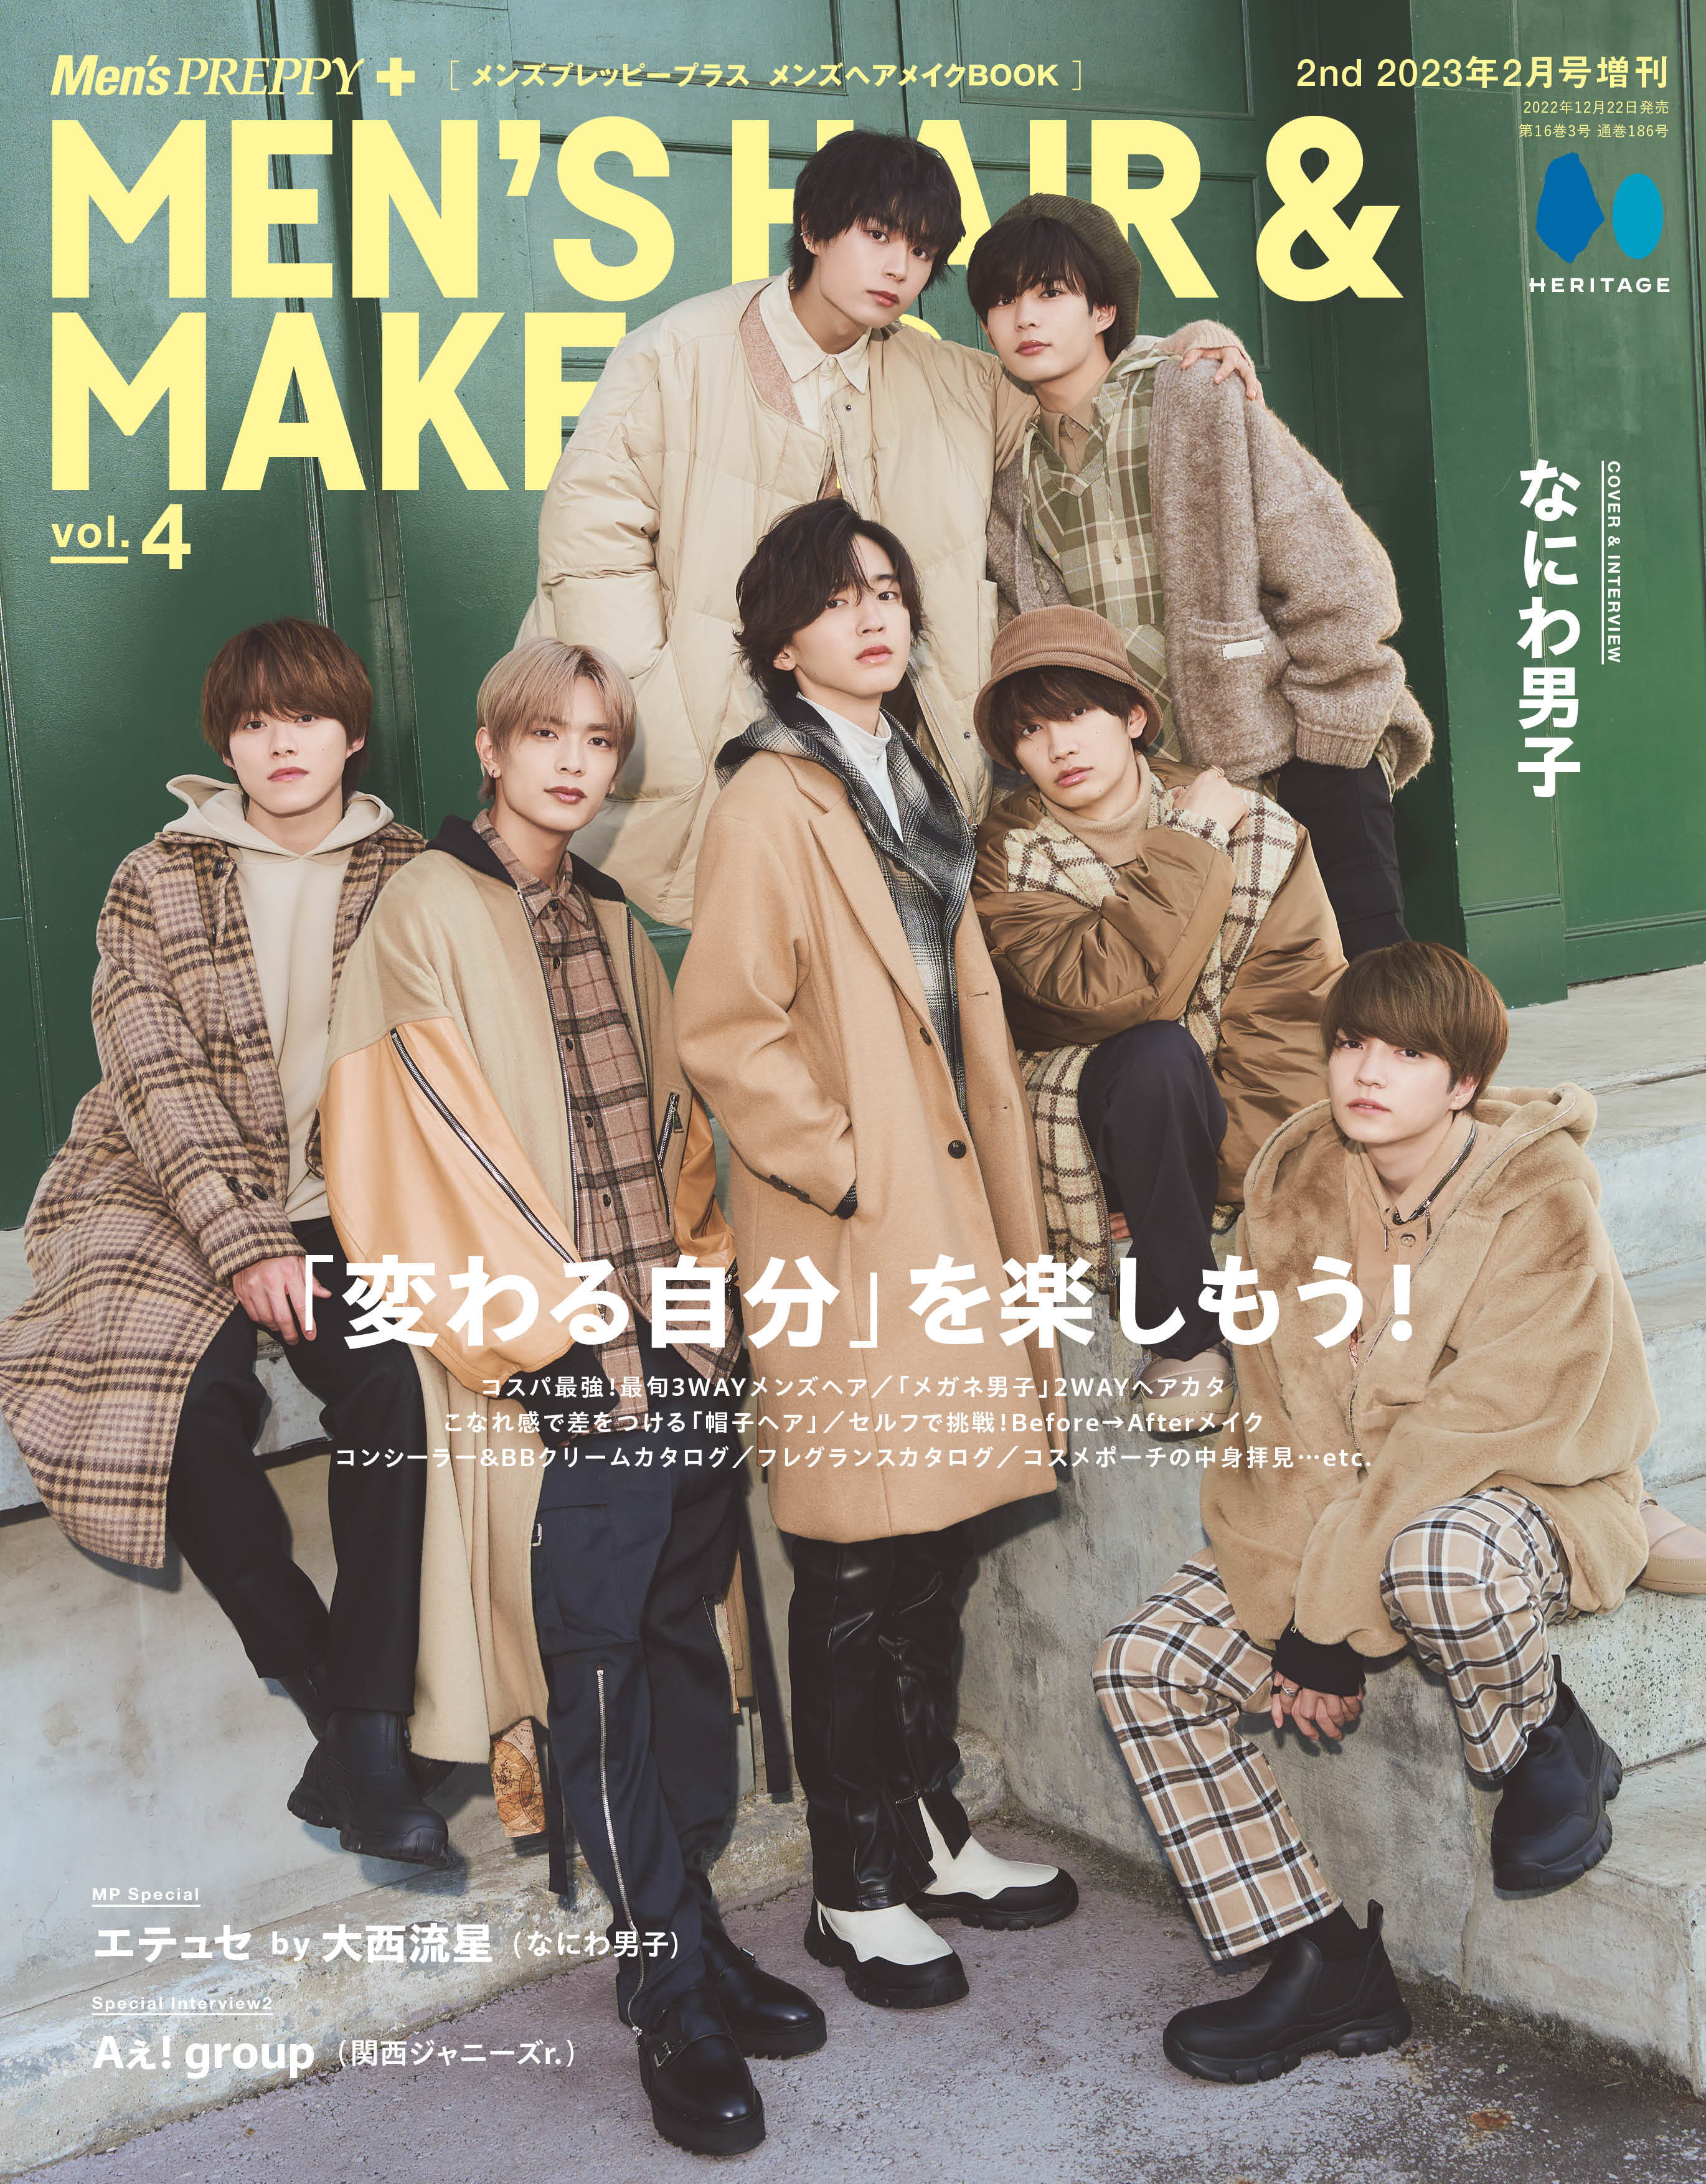 Vol.4　–　【CoverSpacial　PREPPY　Men's　CLUB　PREPPY　プラス　メンズヘアメイクBOOK　Interview:なにわ男子,Spe